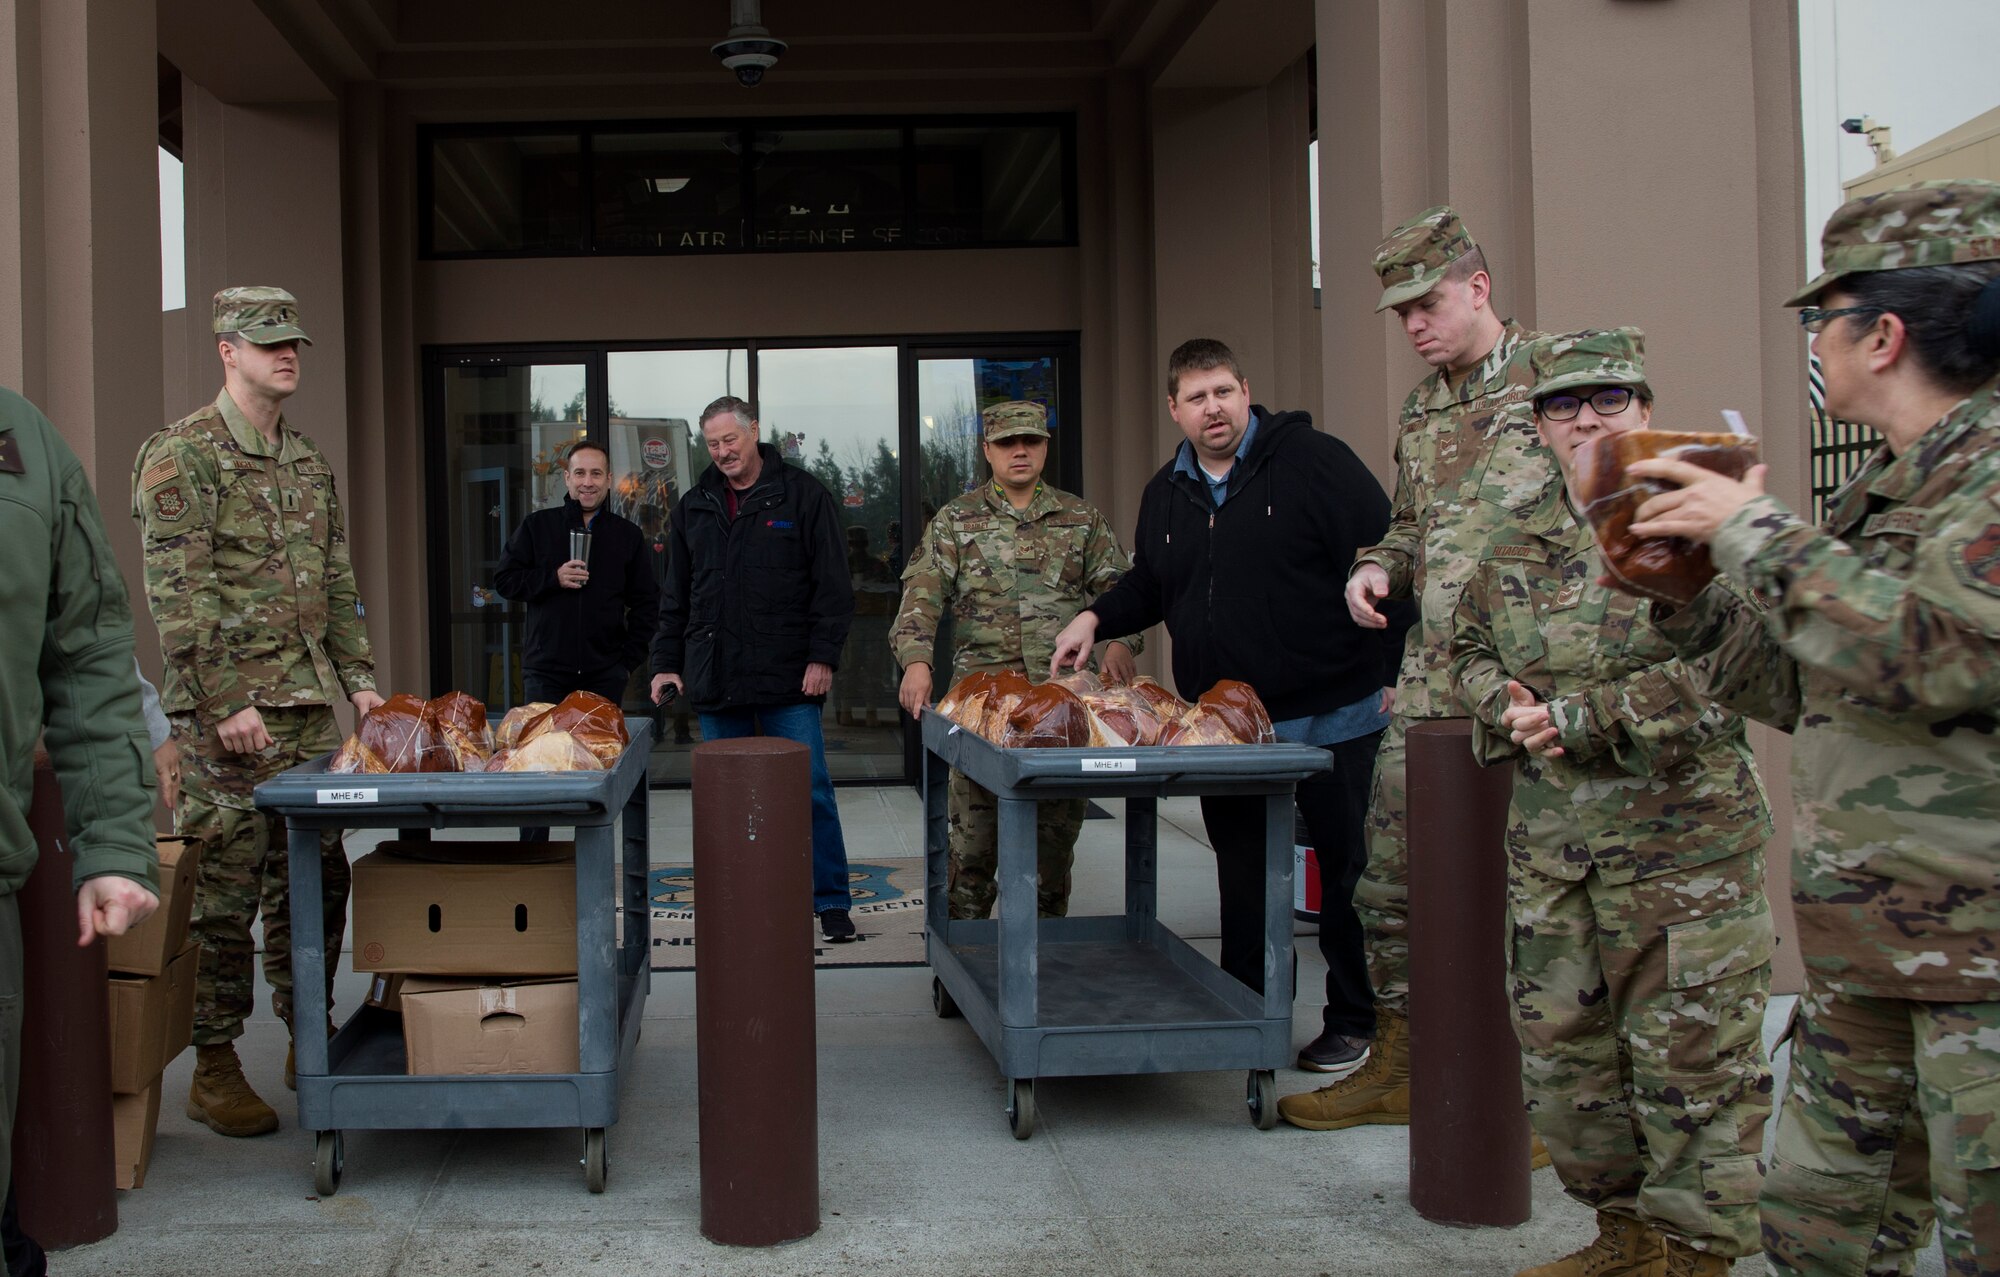 Western Air Defense Sector Airmen carry hams to a cart during Operation Ham Grenade at Joint Base Lewis-McChord, Wash., Dec. 17, 2019. More than 300 hams were donated to McChord Field Airmen by the Air Force Association McChord Field Chapter and Pierce Military Business Alliance. (U.S. Air Force photo by Senior Airman Tryphena Mayhugh)